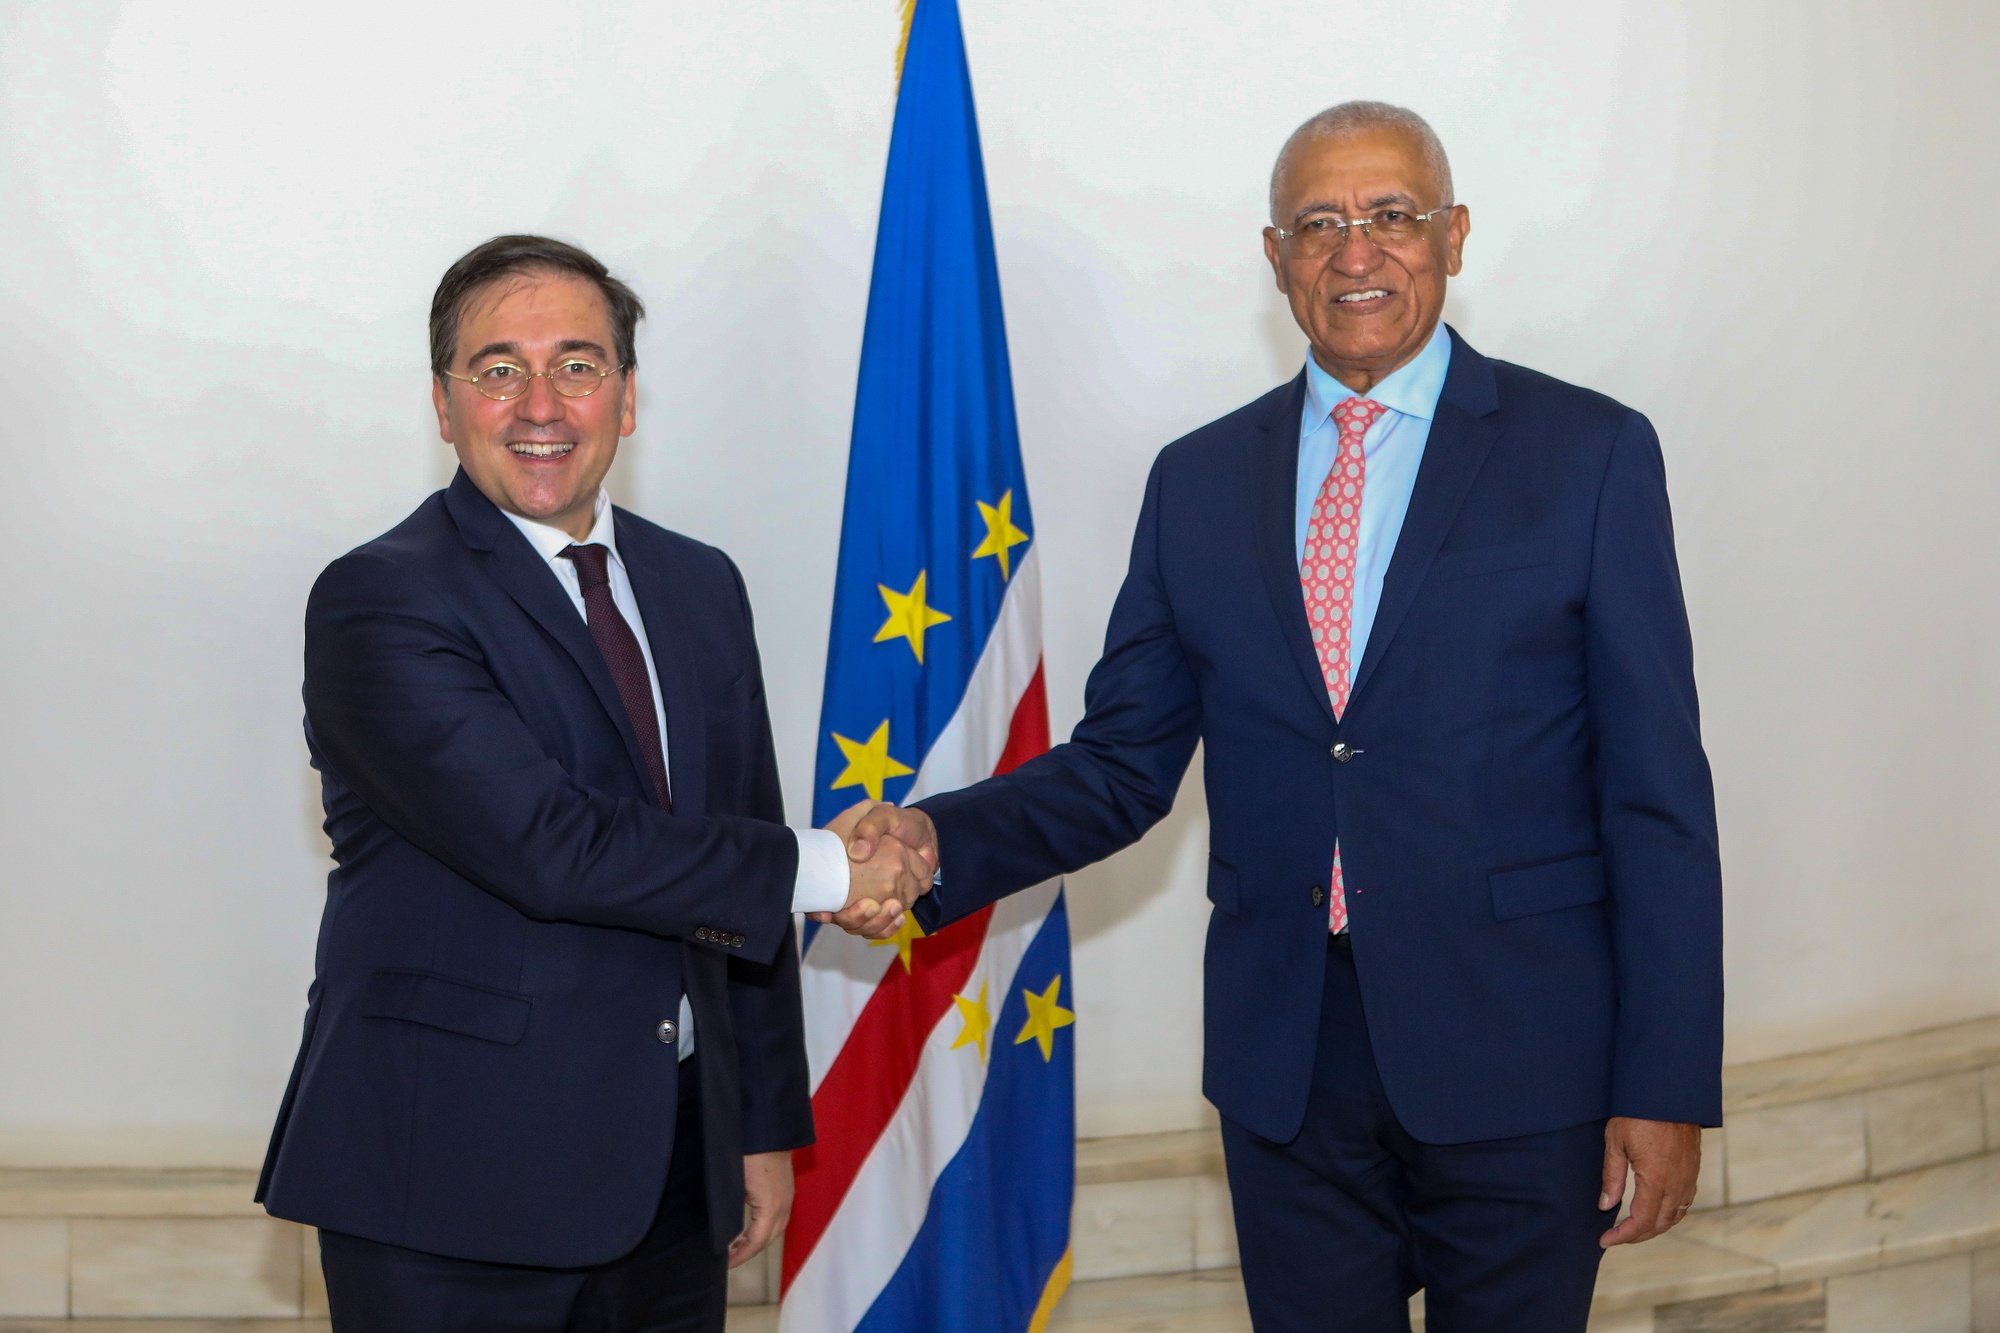 Spanish Foreign Minister, Jose Manuel Albares (L) with his Cape Verdean counterpart, Rui Figueiredo Soares, Praia, Cape Verde, 18 June 2024. Jose Manuel Albares is traveling to Cape Verde with the aim of reinforcing the Spanish government&#039;s commitment to the country&#039;s economic future and to the reforms aimed at promoting the implementation of the blue economy and increasing security, ELTON MONTEIRO/LUSA